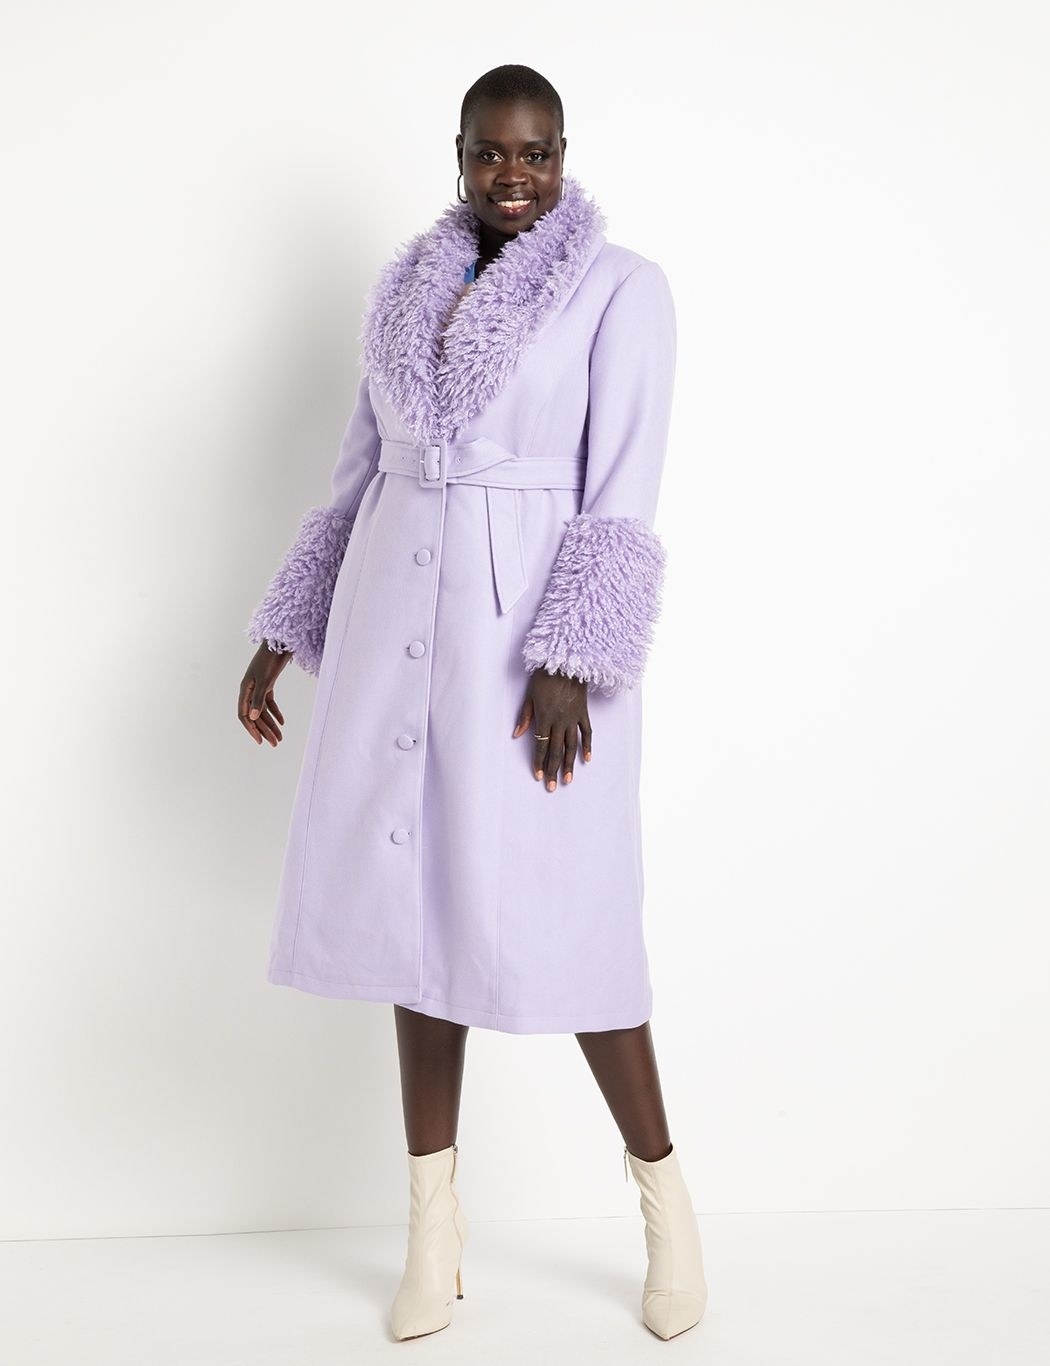 model in light purple long coat with a waist tie and purple faux fur trim on the cuffs and collar